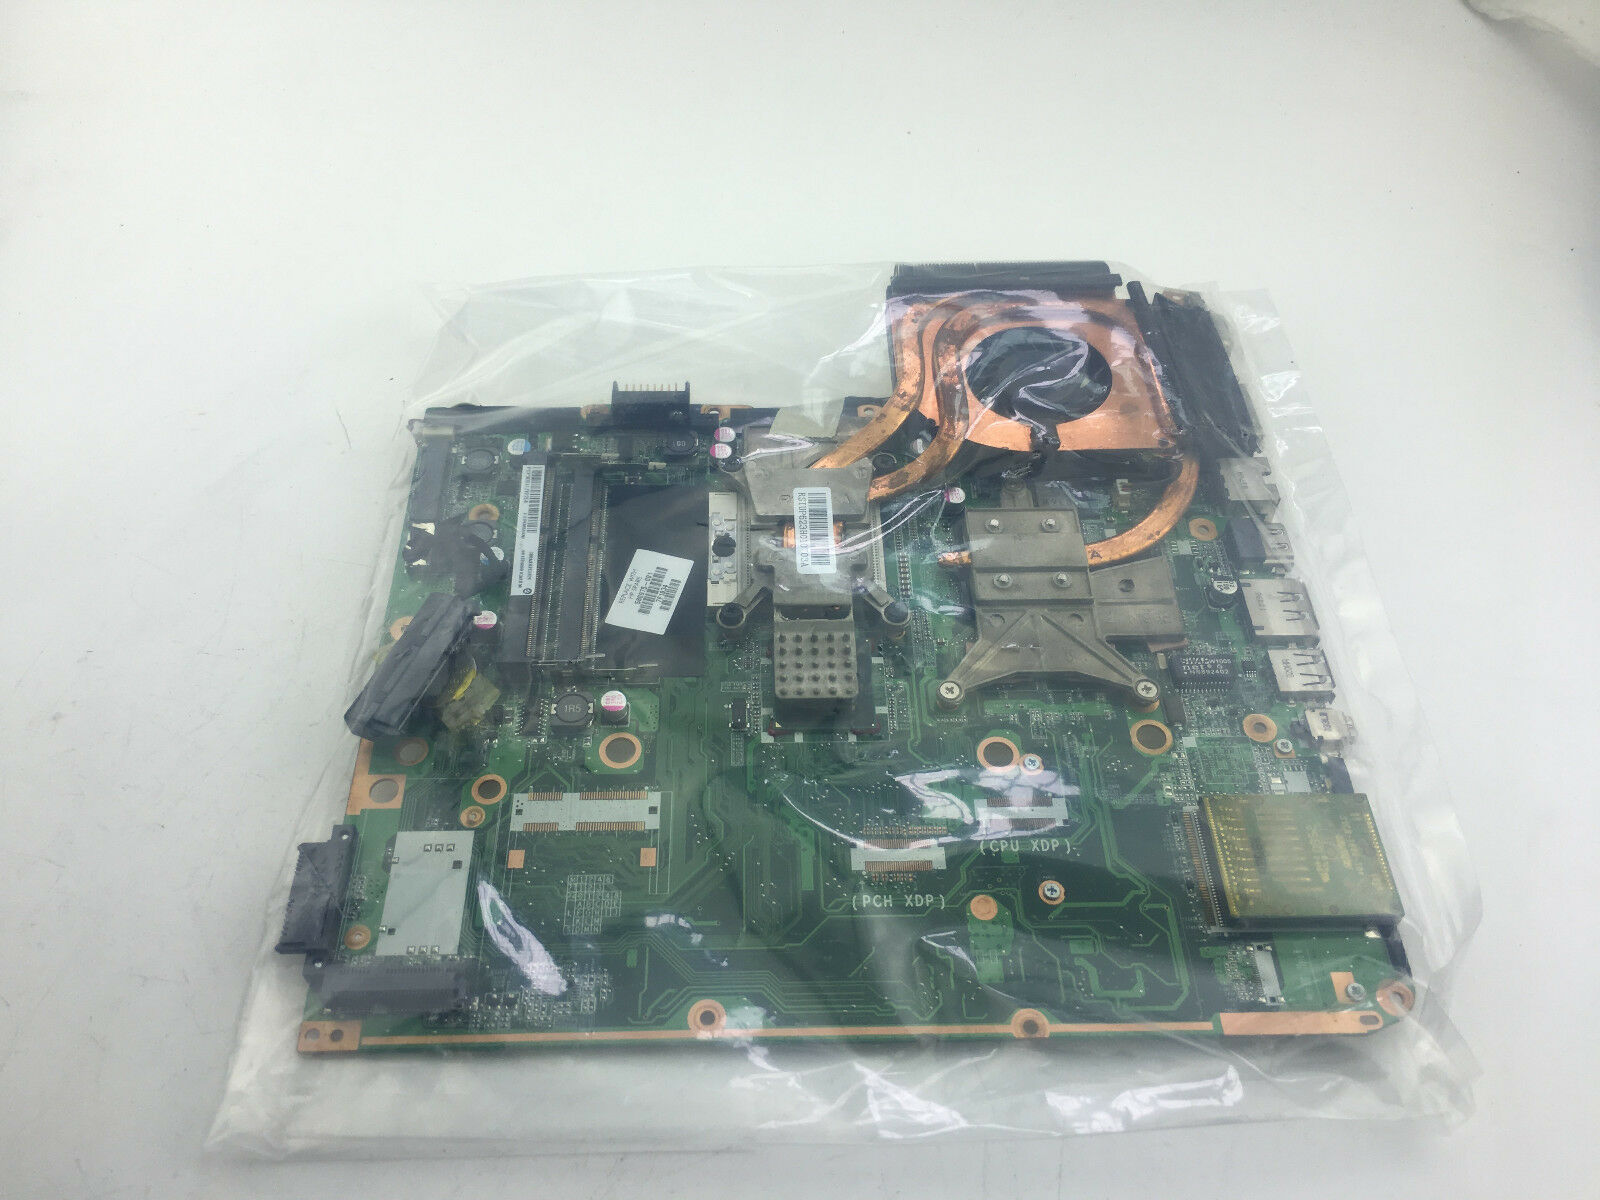 580975-001 Intel/Nvidia Motherboard for HP DV6-2000 Laptop, PM55, i3 i5 only, A Compatible CPU Brand: Intel